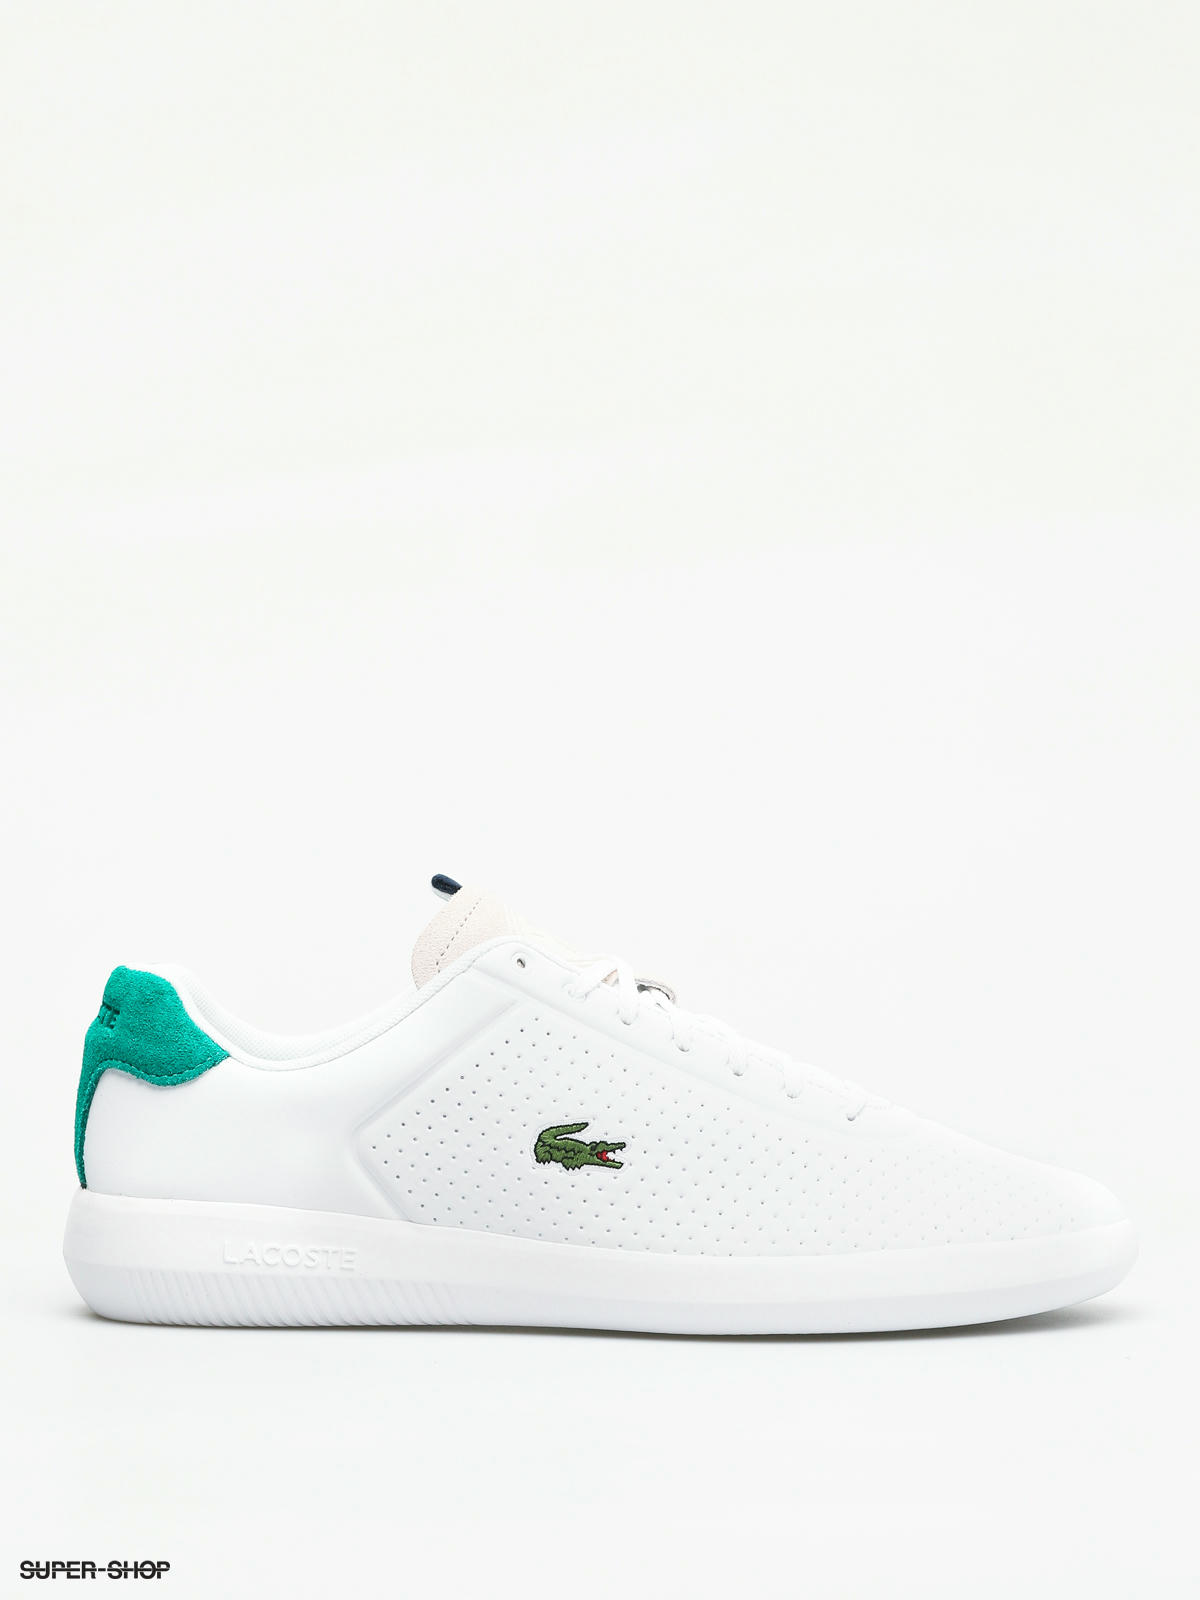 Lacoste Avance 119 1 Shoes (white/green)